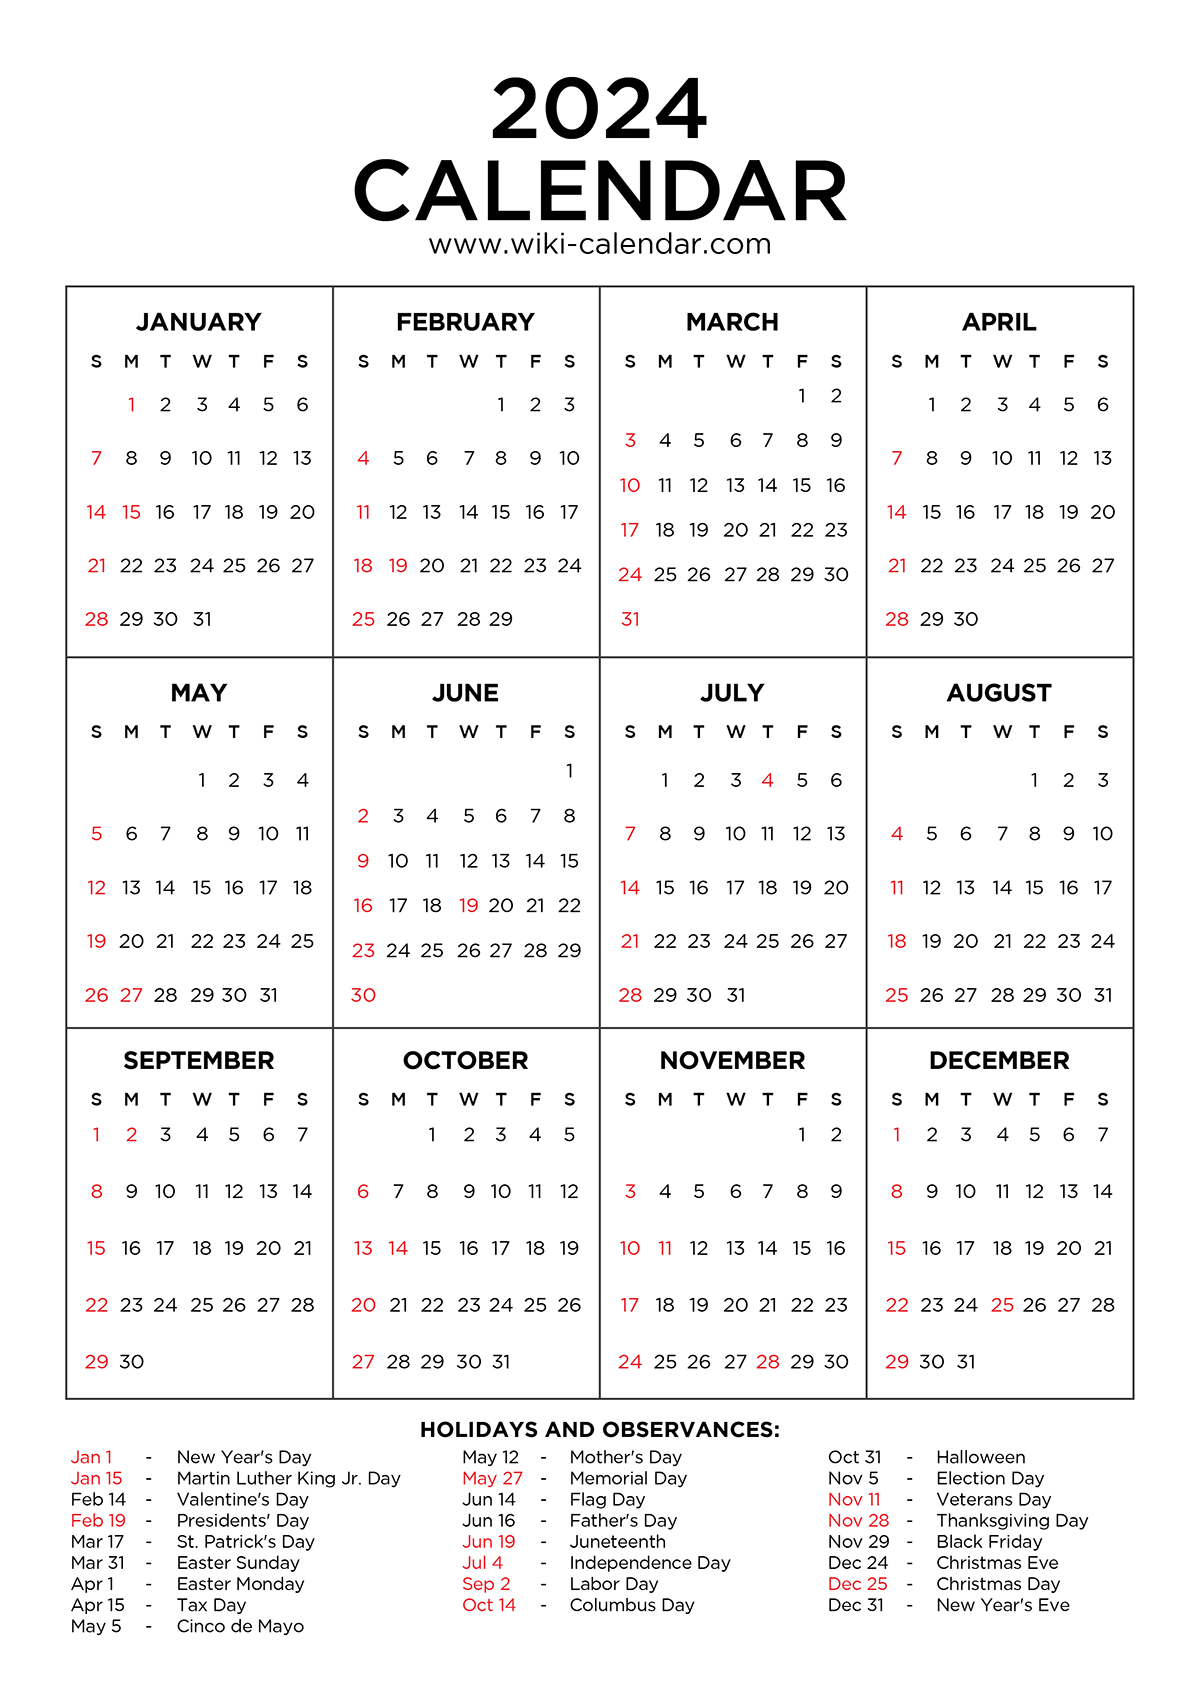 Year 2024 Calendar Printable With Holidays - Wiki Calendar within Free Printable Blank Square Calendar 2024 Full Year